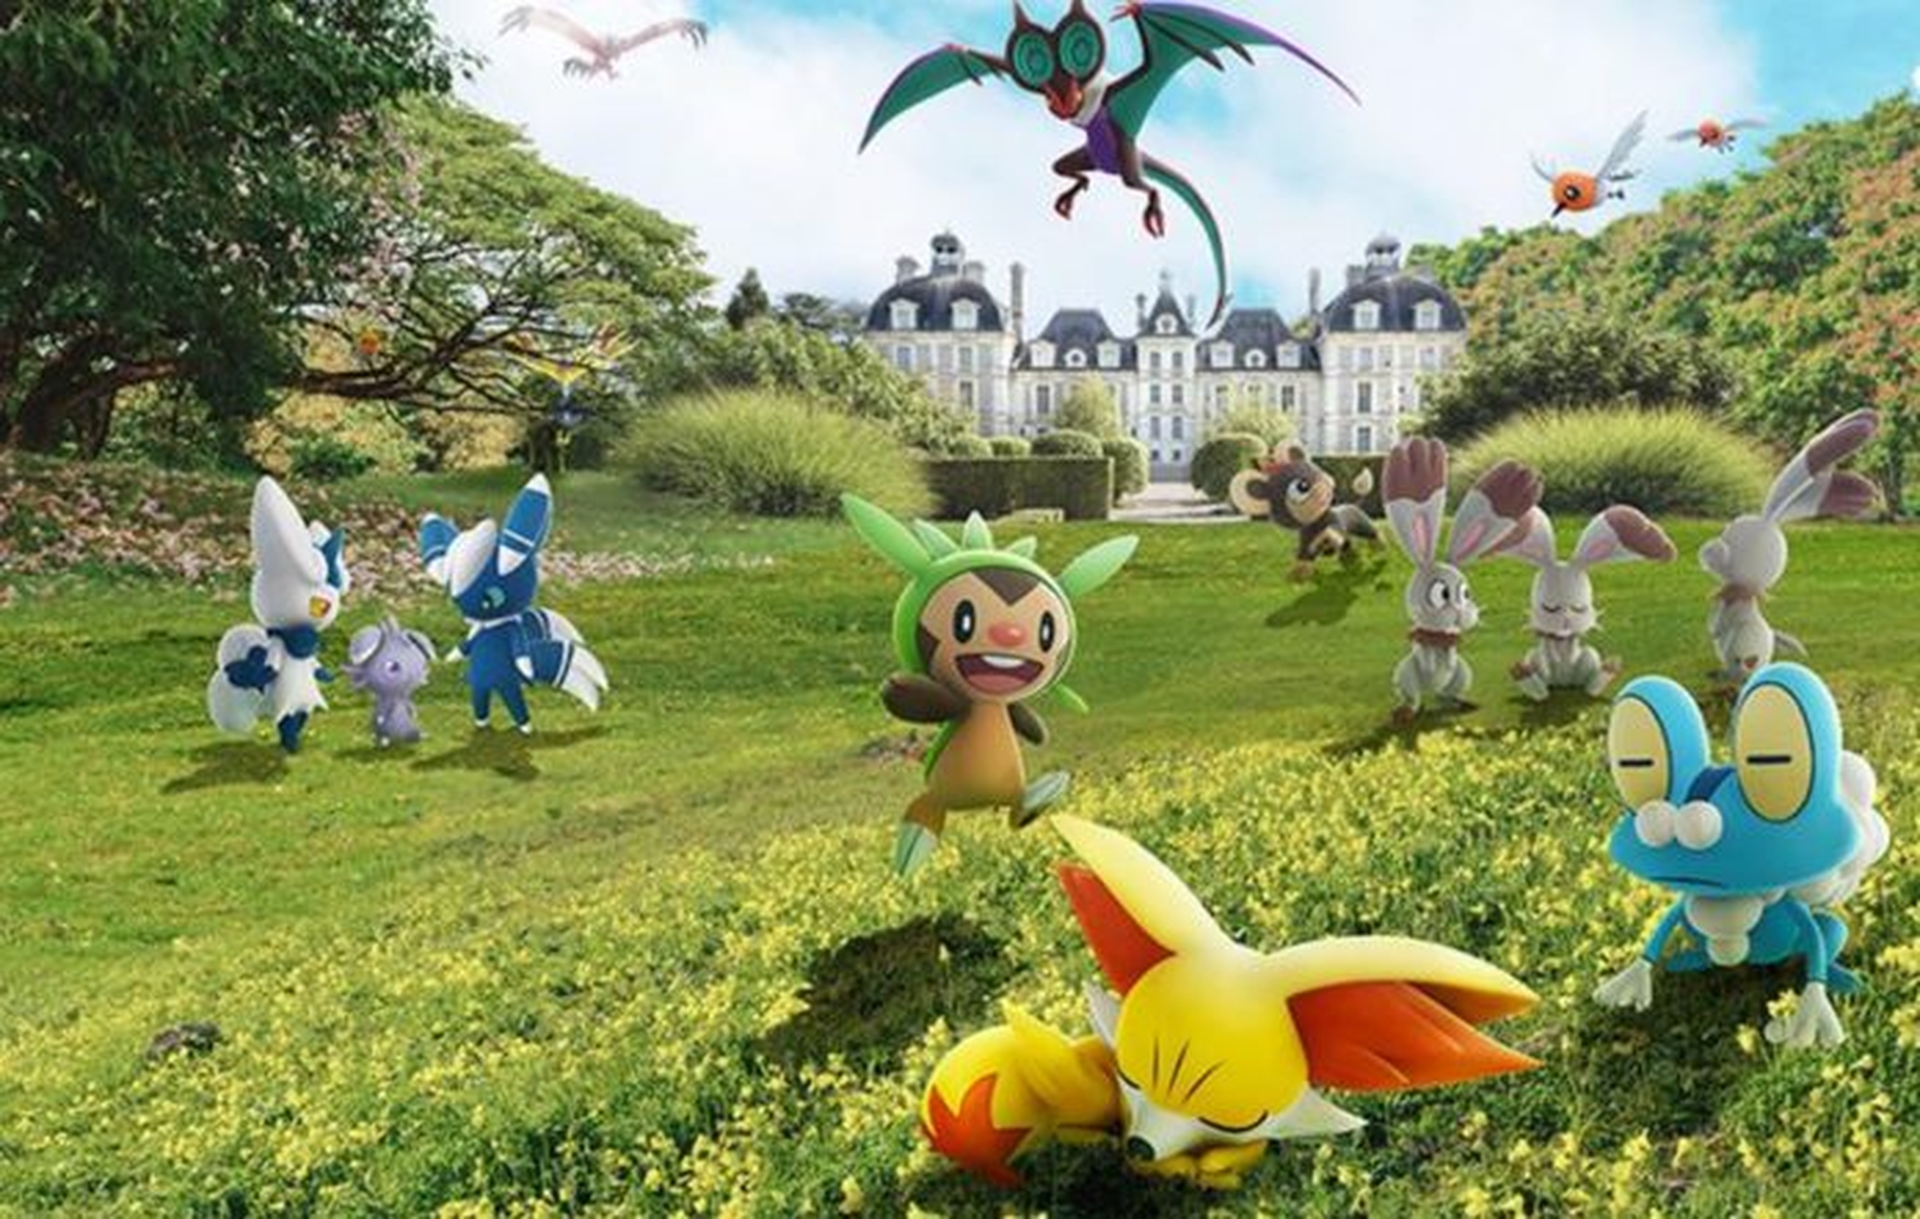 Pokemon GO offers up many Pokemons for trainers to grab and evolve, so today we're telling you all there is to know about Sewaddle evolution and more.